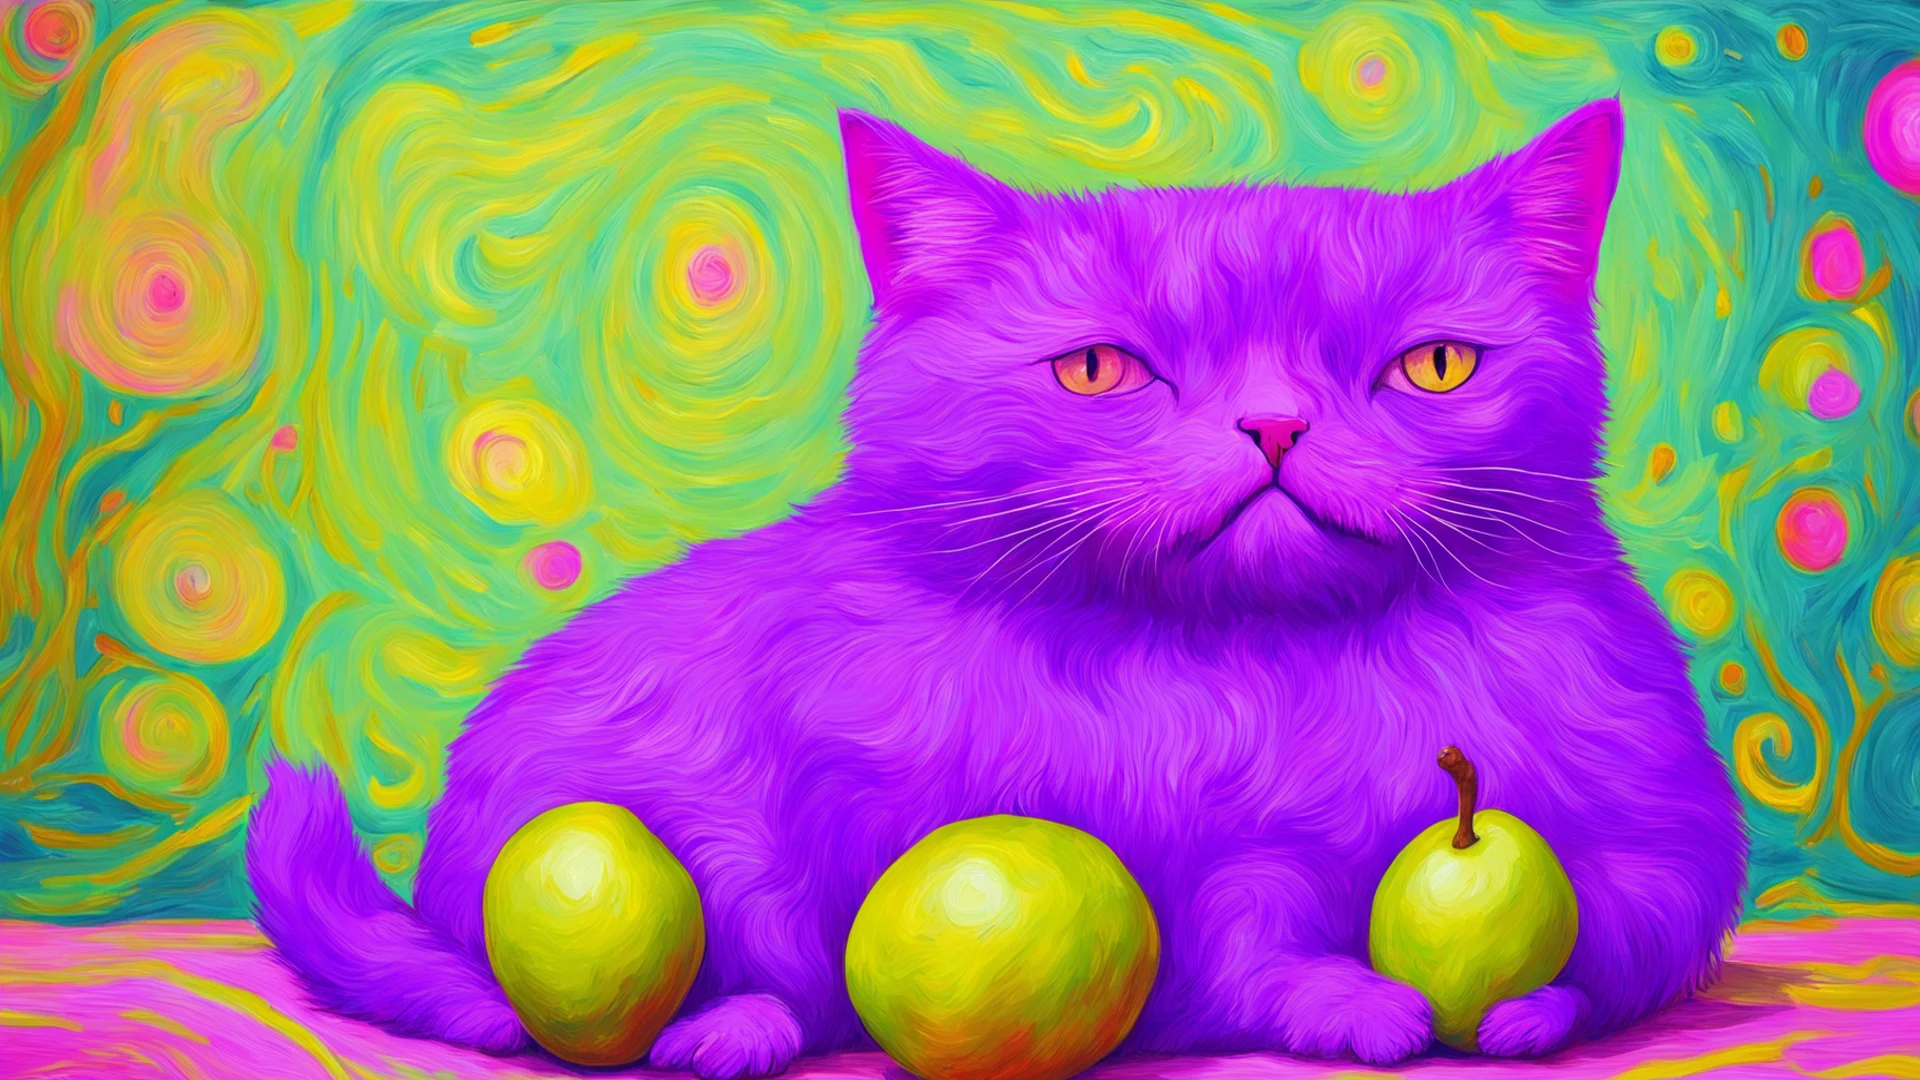 a purple cat with pink strips. the cat is eating a pear. the pear has a face and is looking sad. the background is in vincent van gogh style wide